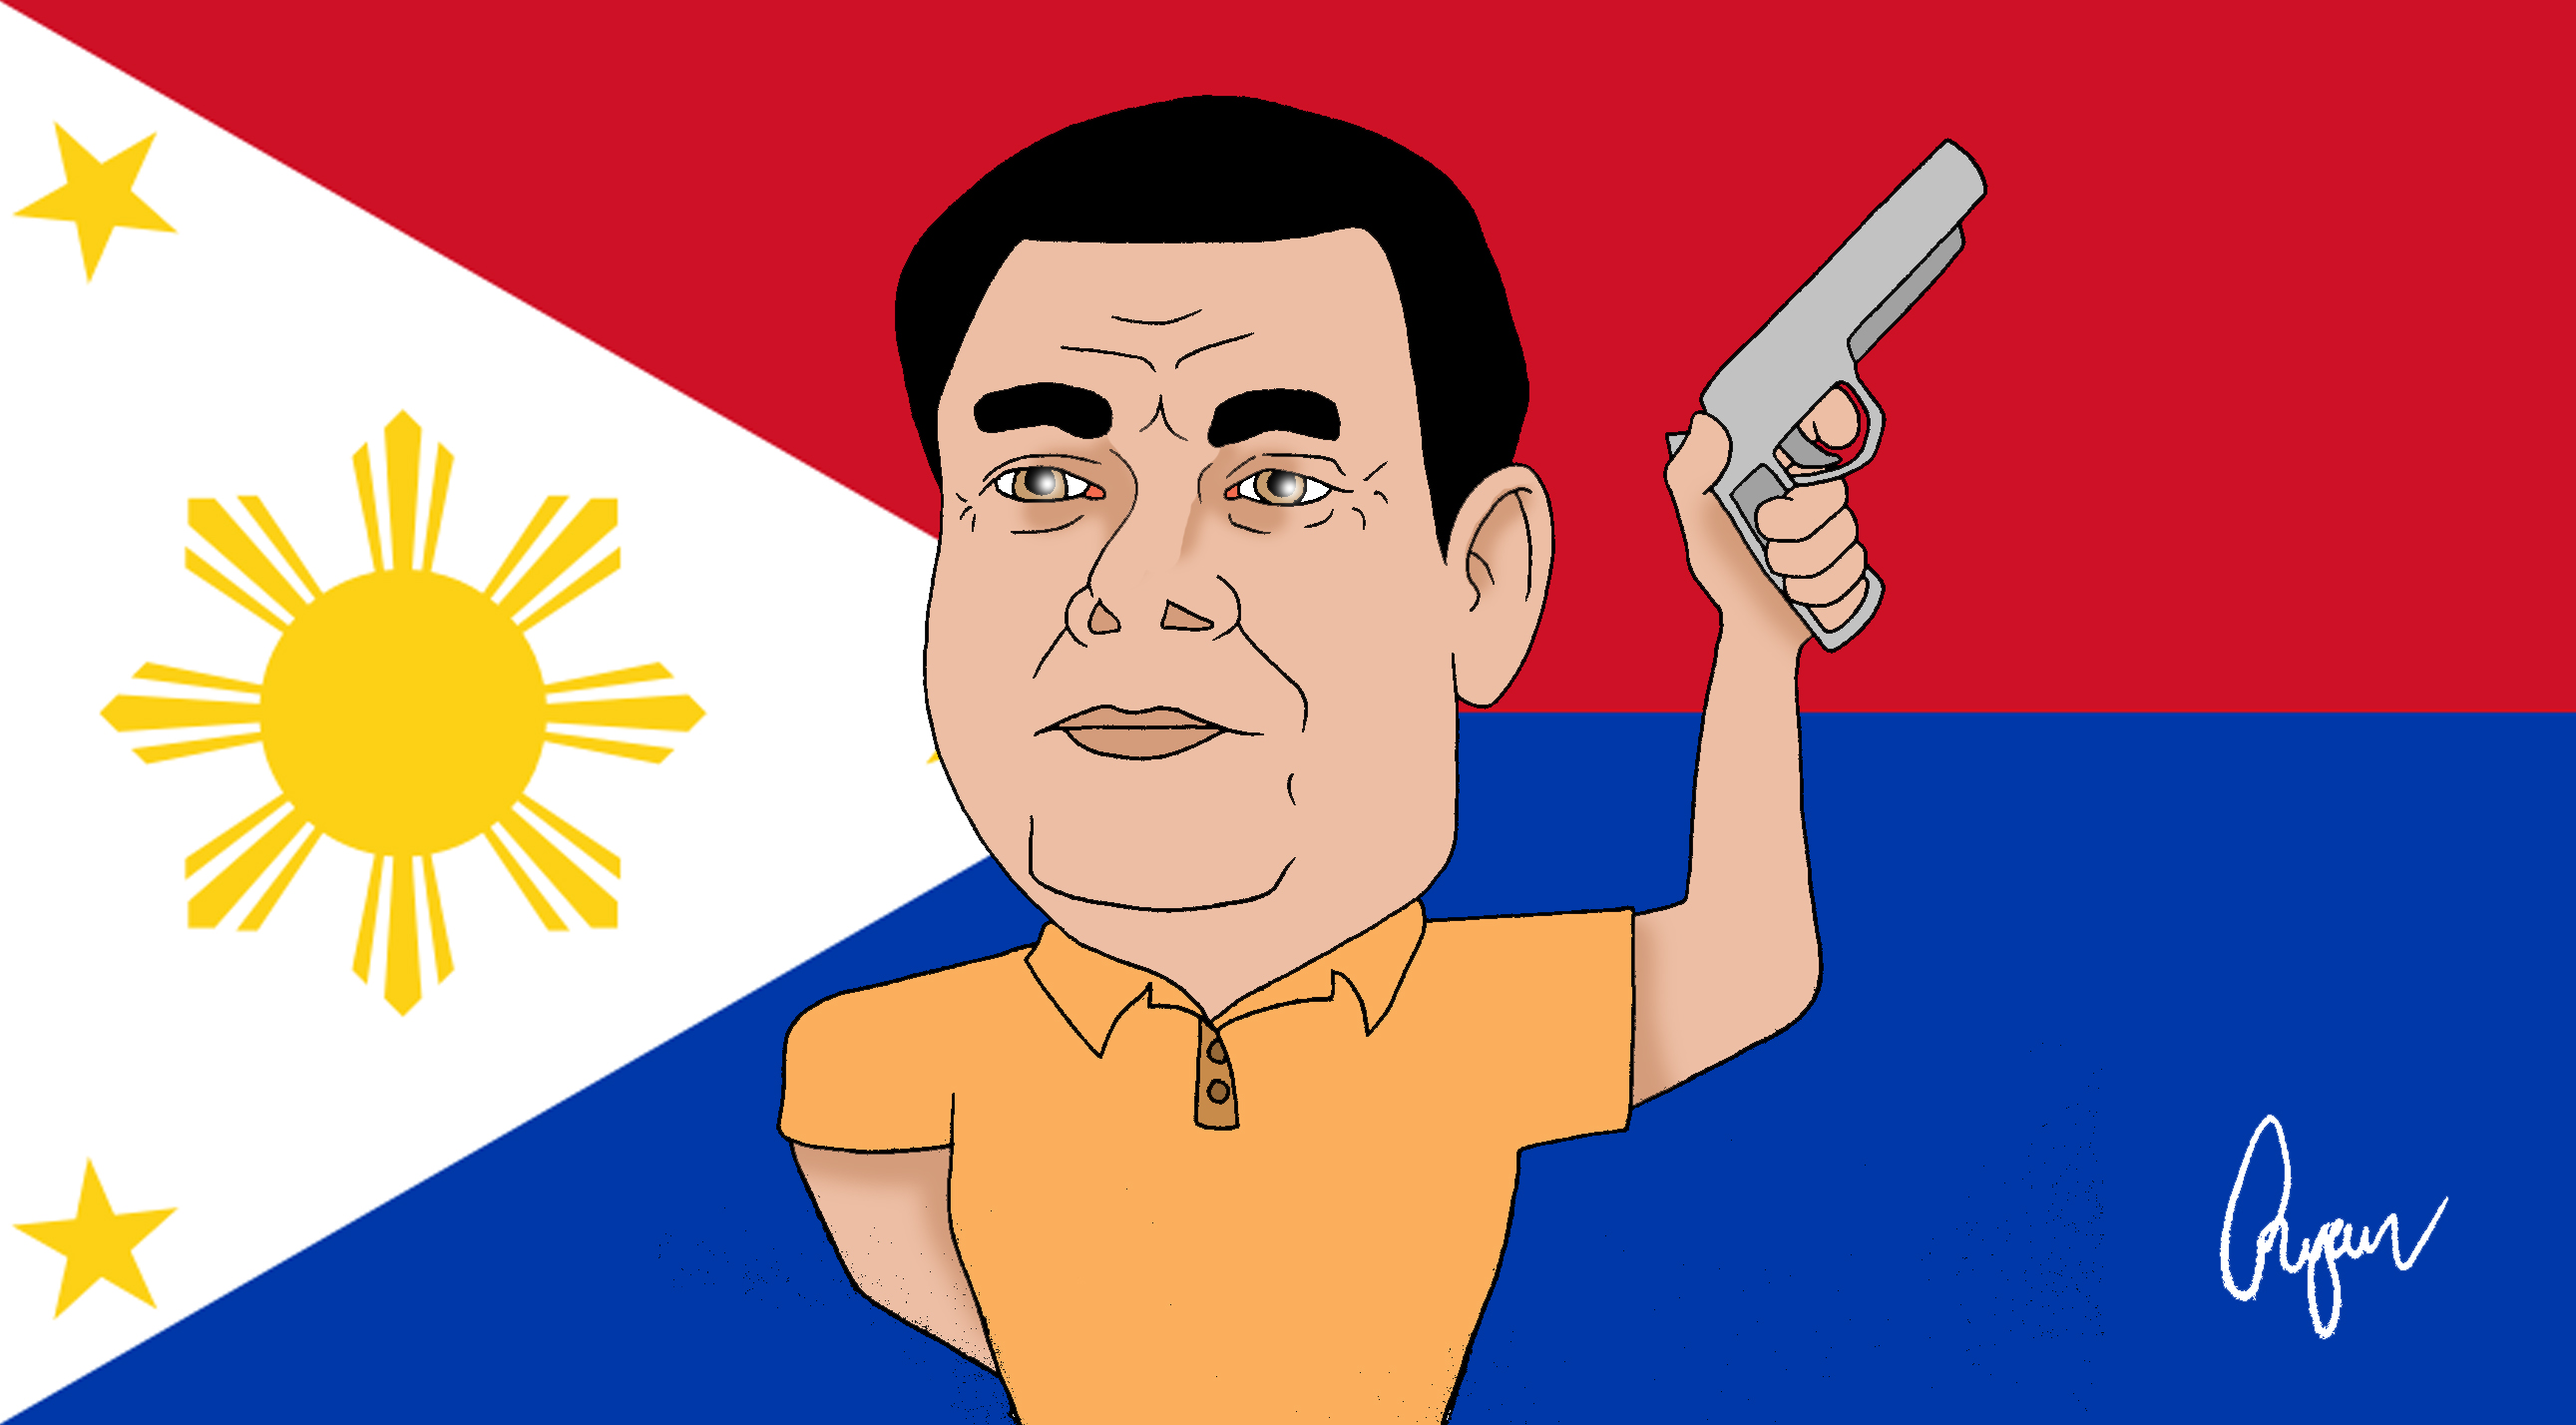 Food for thought – Duterte’s Narco Nihilism and the globalist hand